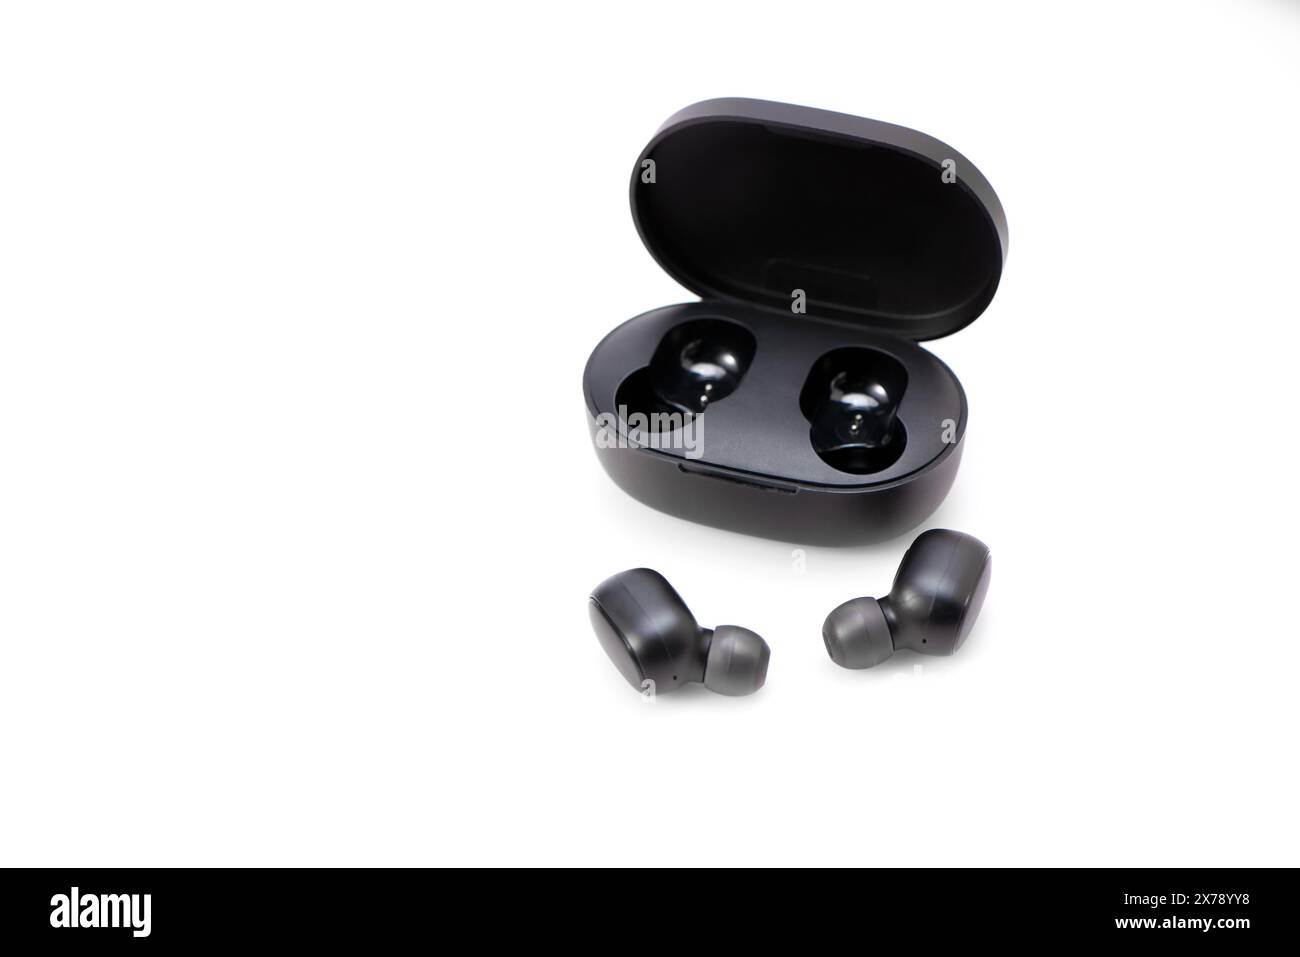 Wireless headphones isolated on a white background. Headset close up in the charging case close-up Stock Photo